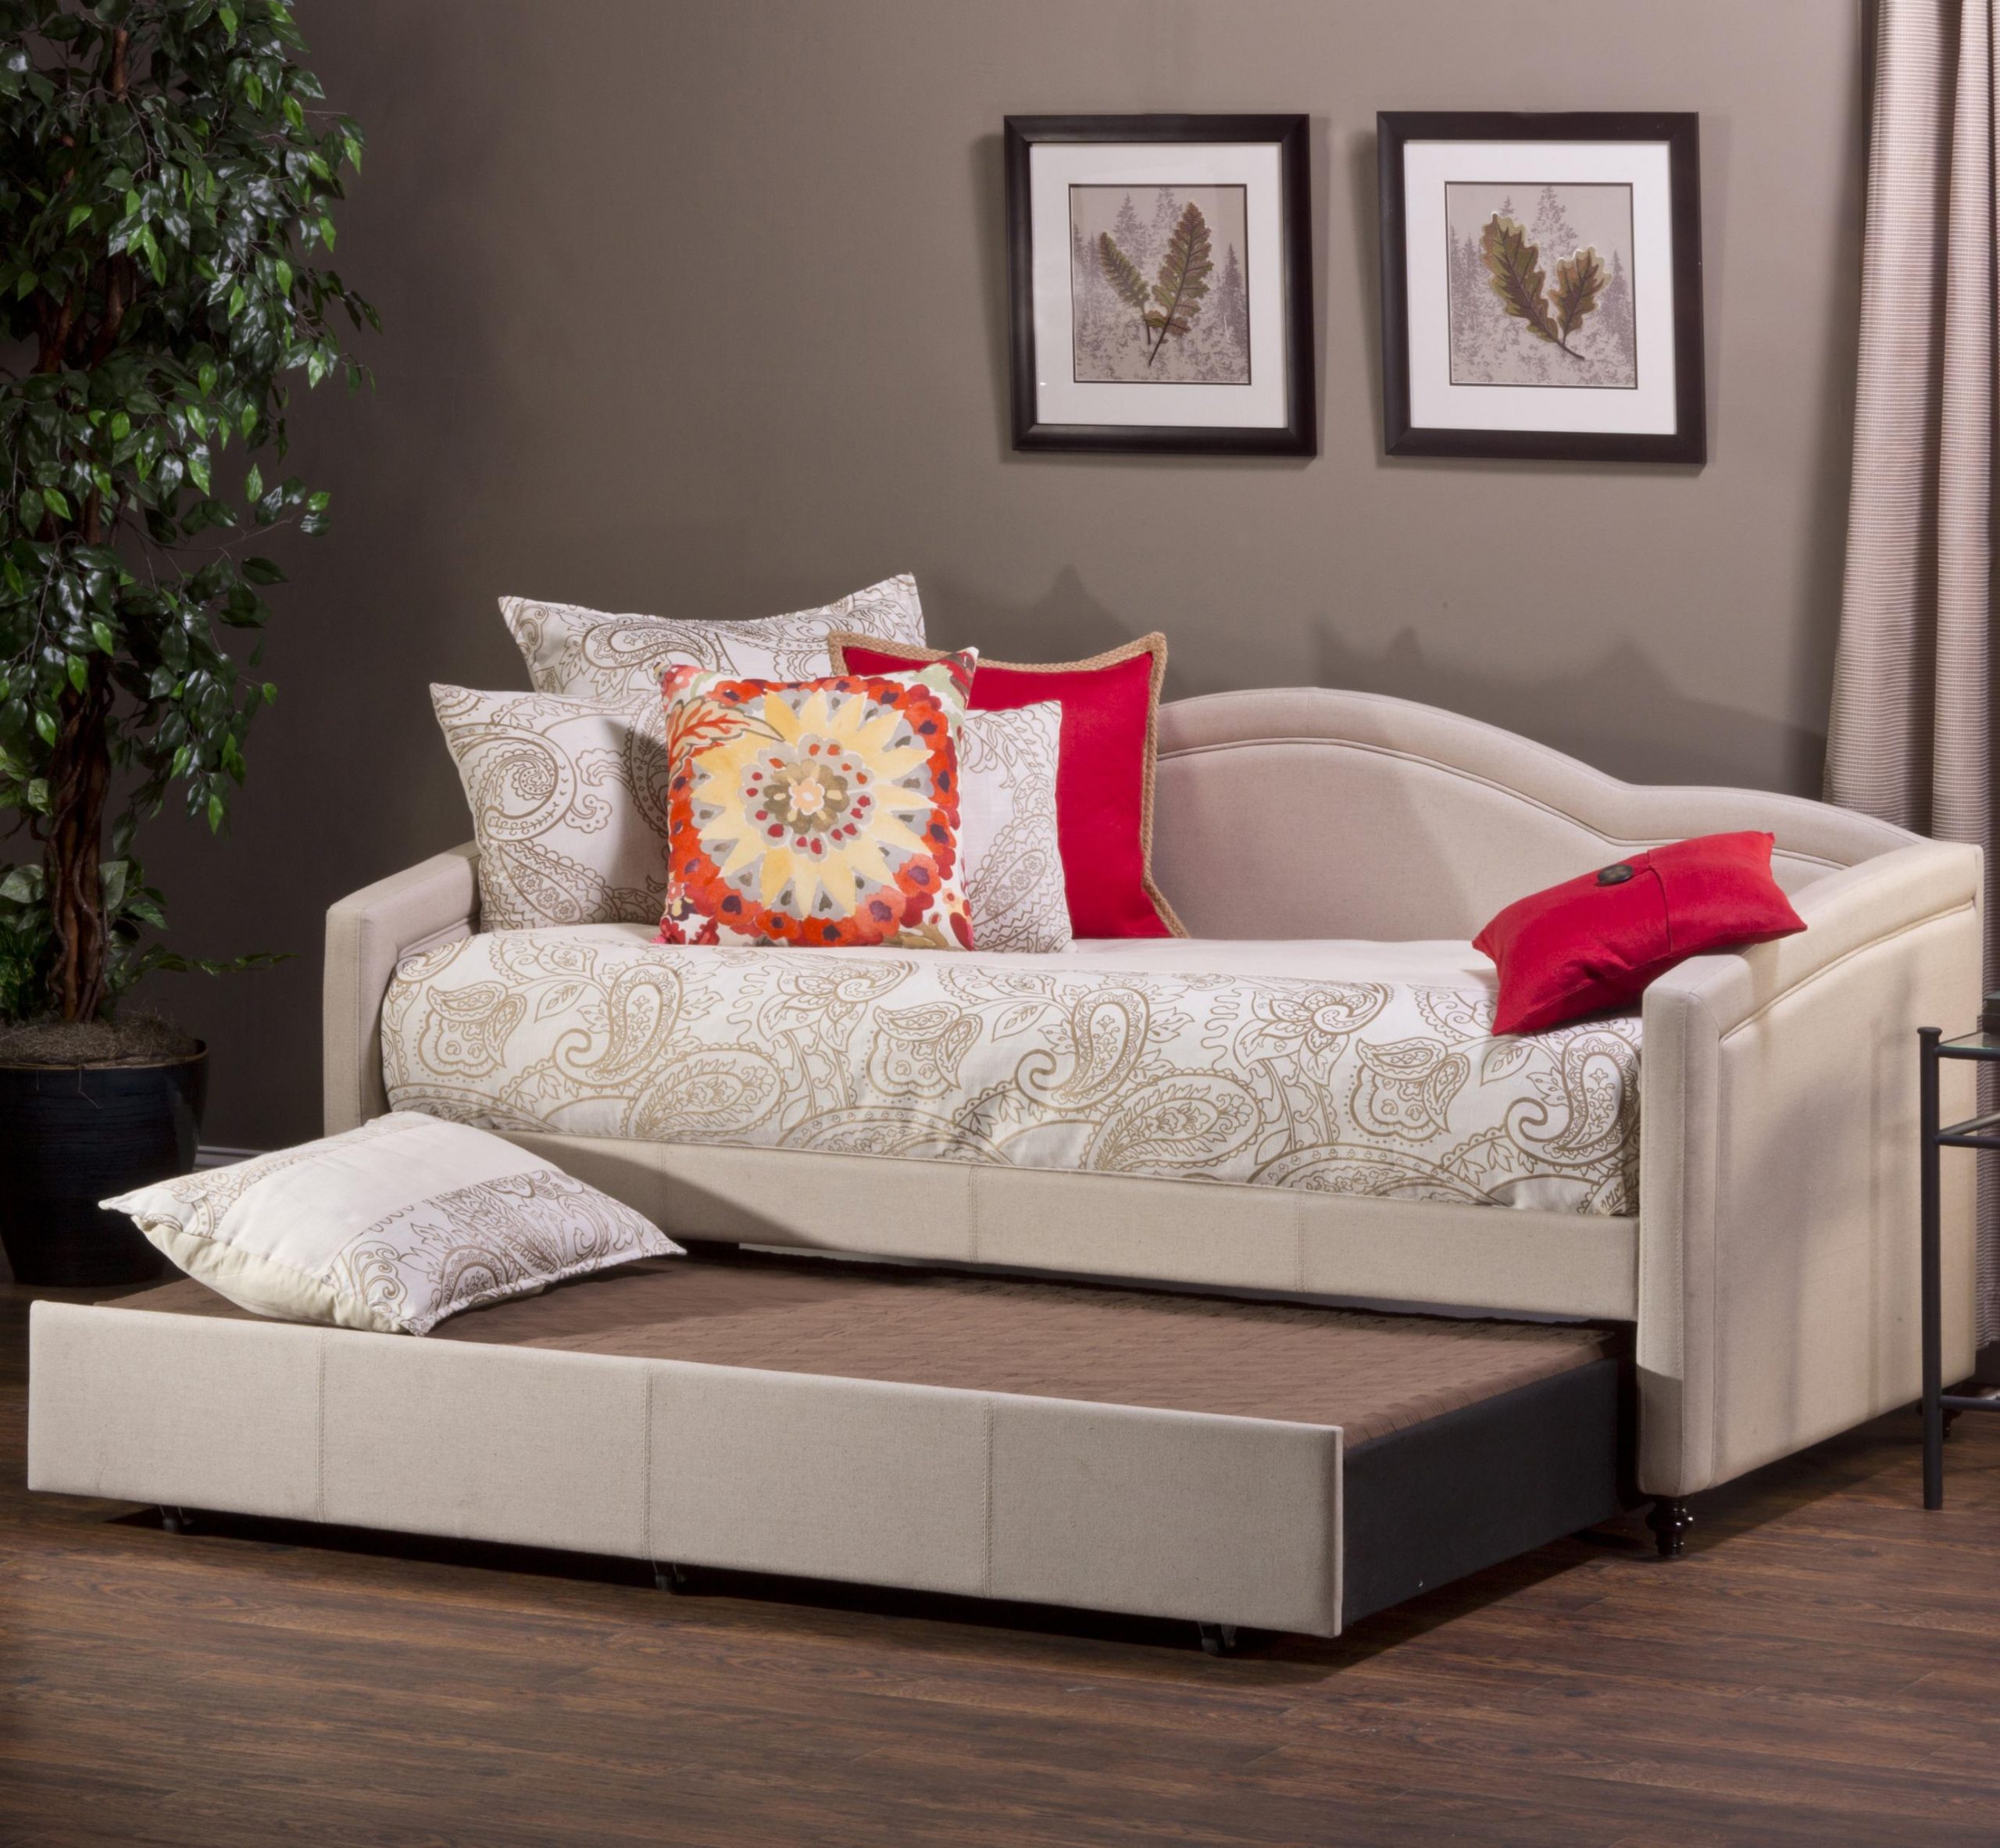 Hillsdale Daybeds Jasmine Daybed w/ Trundle